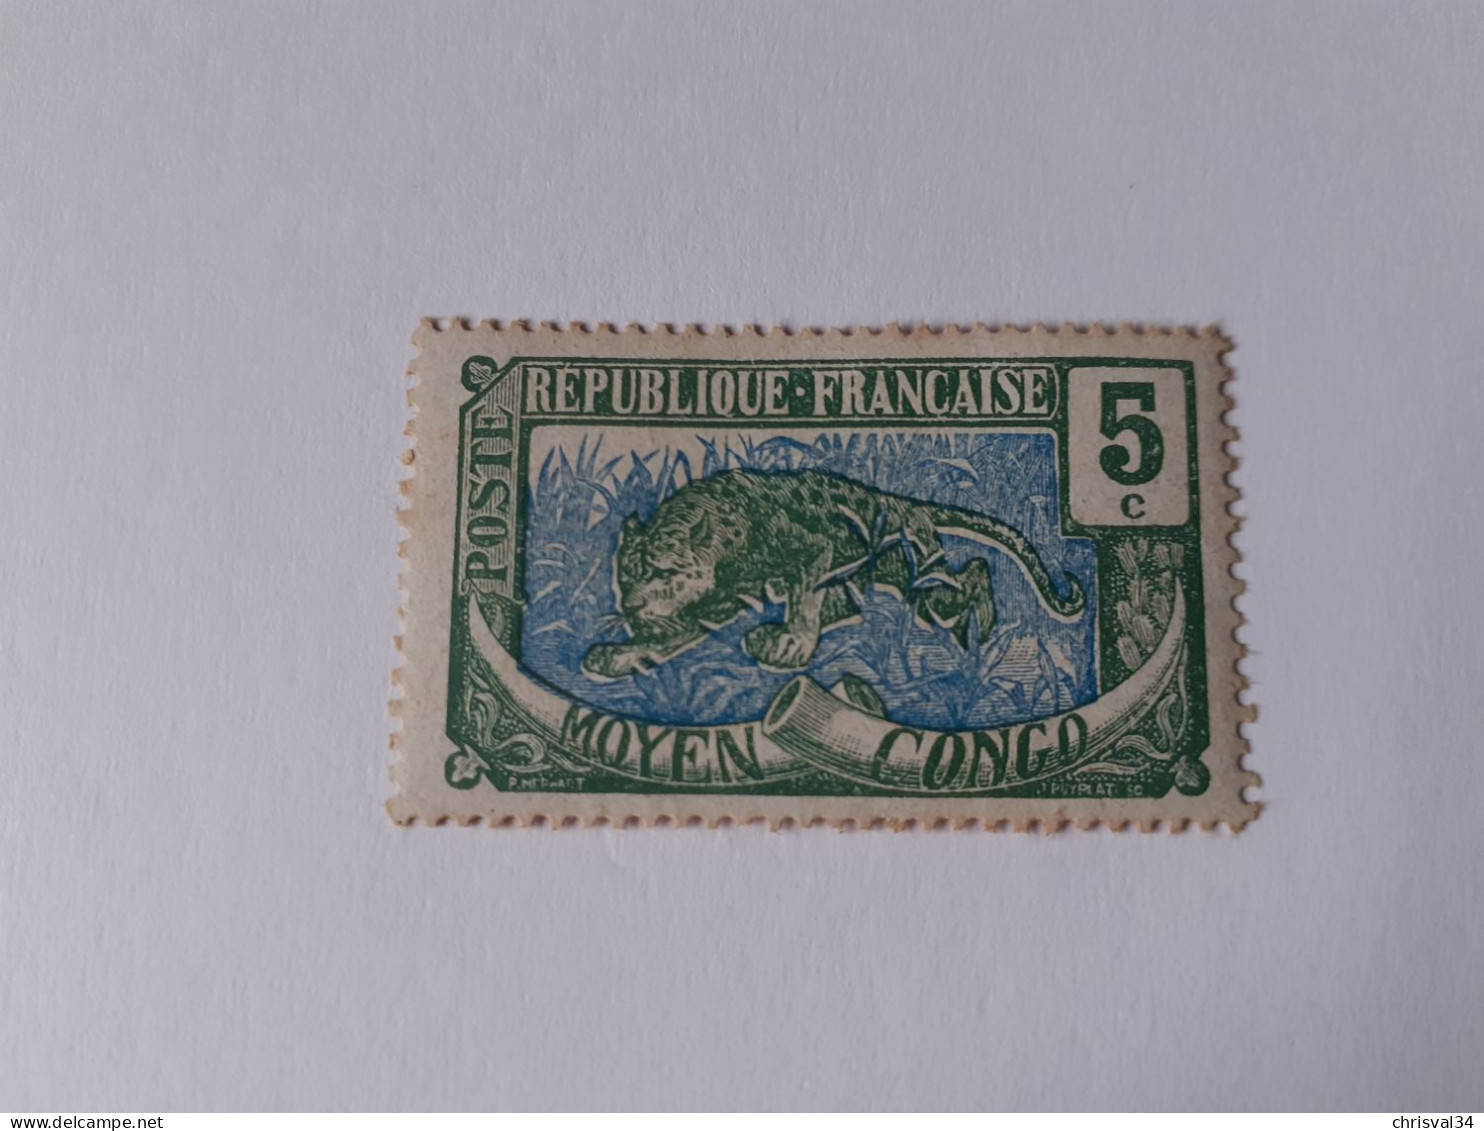 TIMBRE  CONGO    N  51     COTE  1,30  EUROS    NEUF  TRACE  CHARNIERE - Unused Stamps